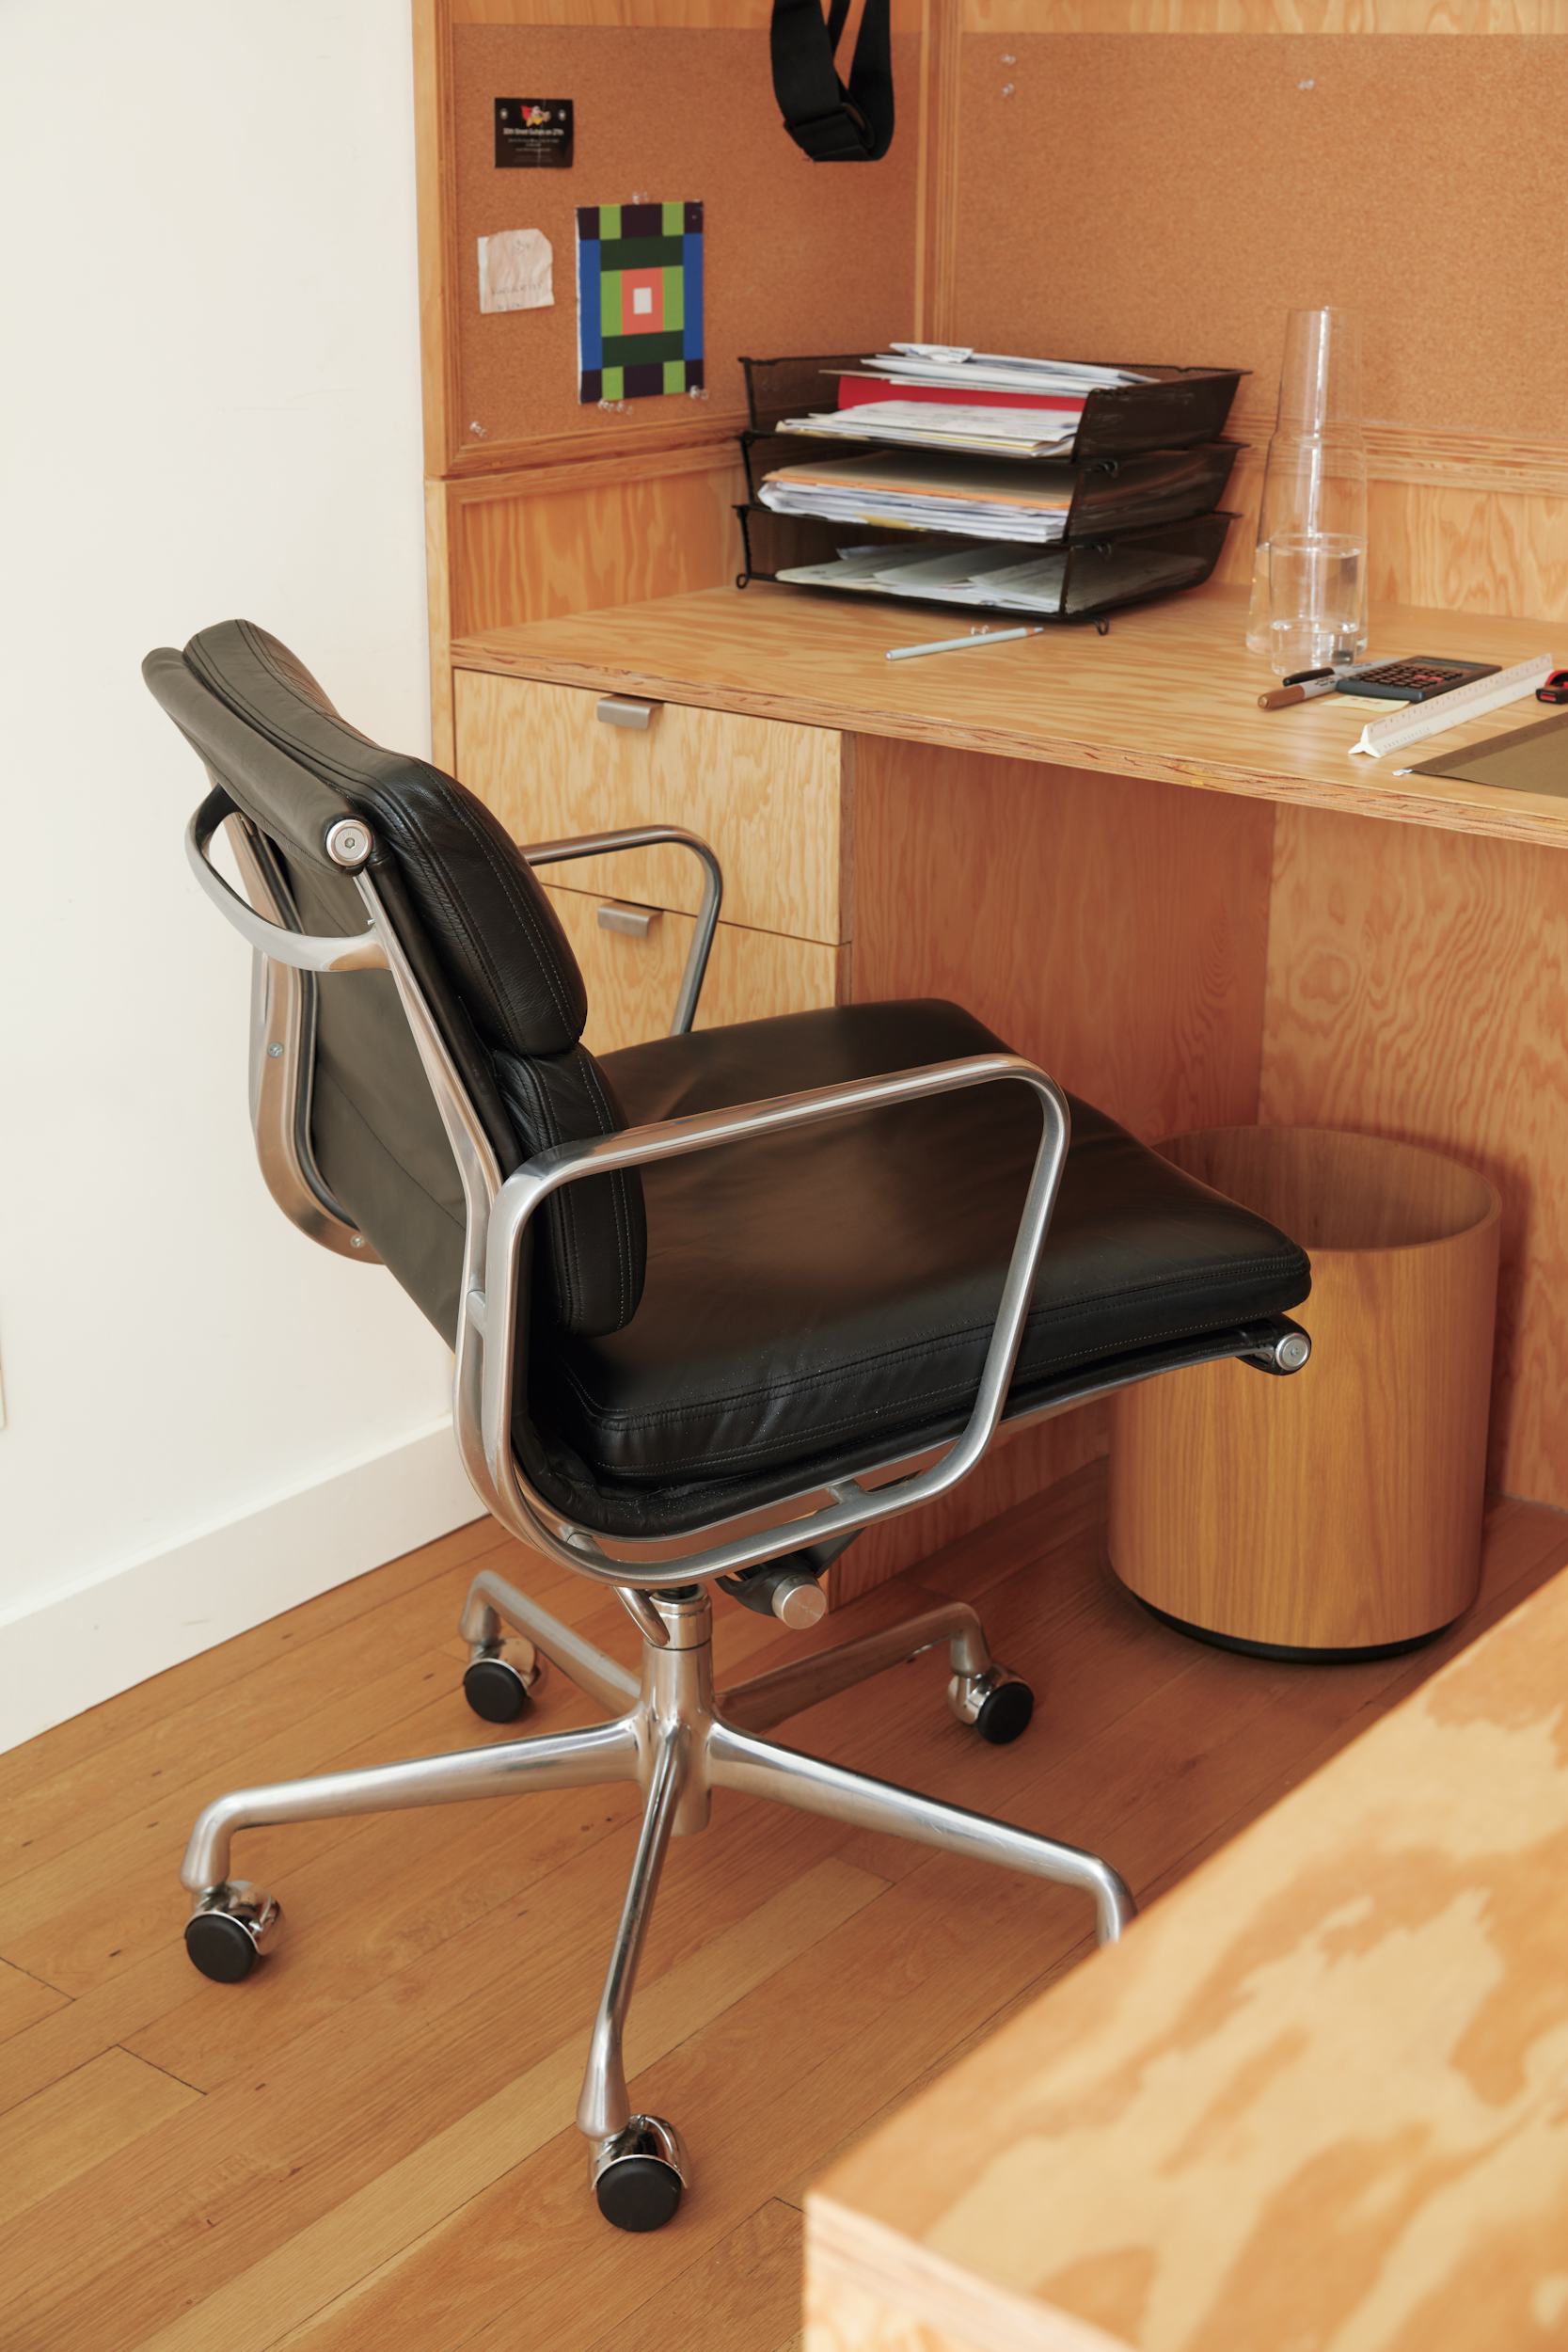 Eames Soft Pad Group Management Chair with No Arms for Herman Miller